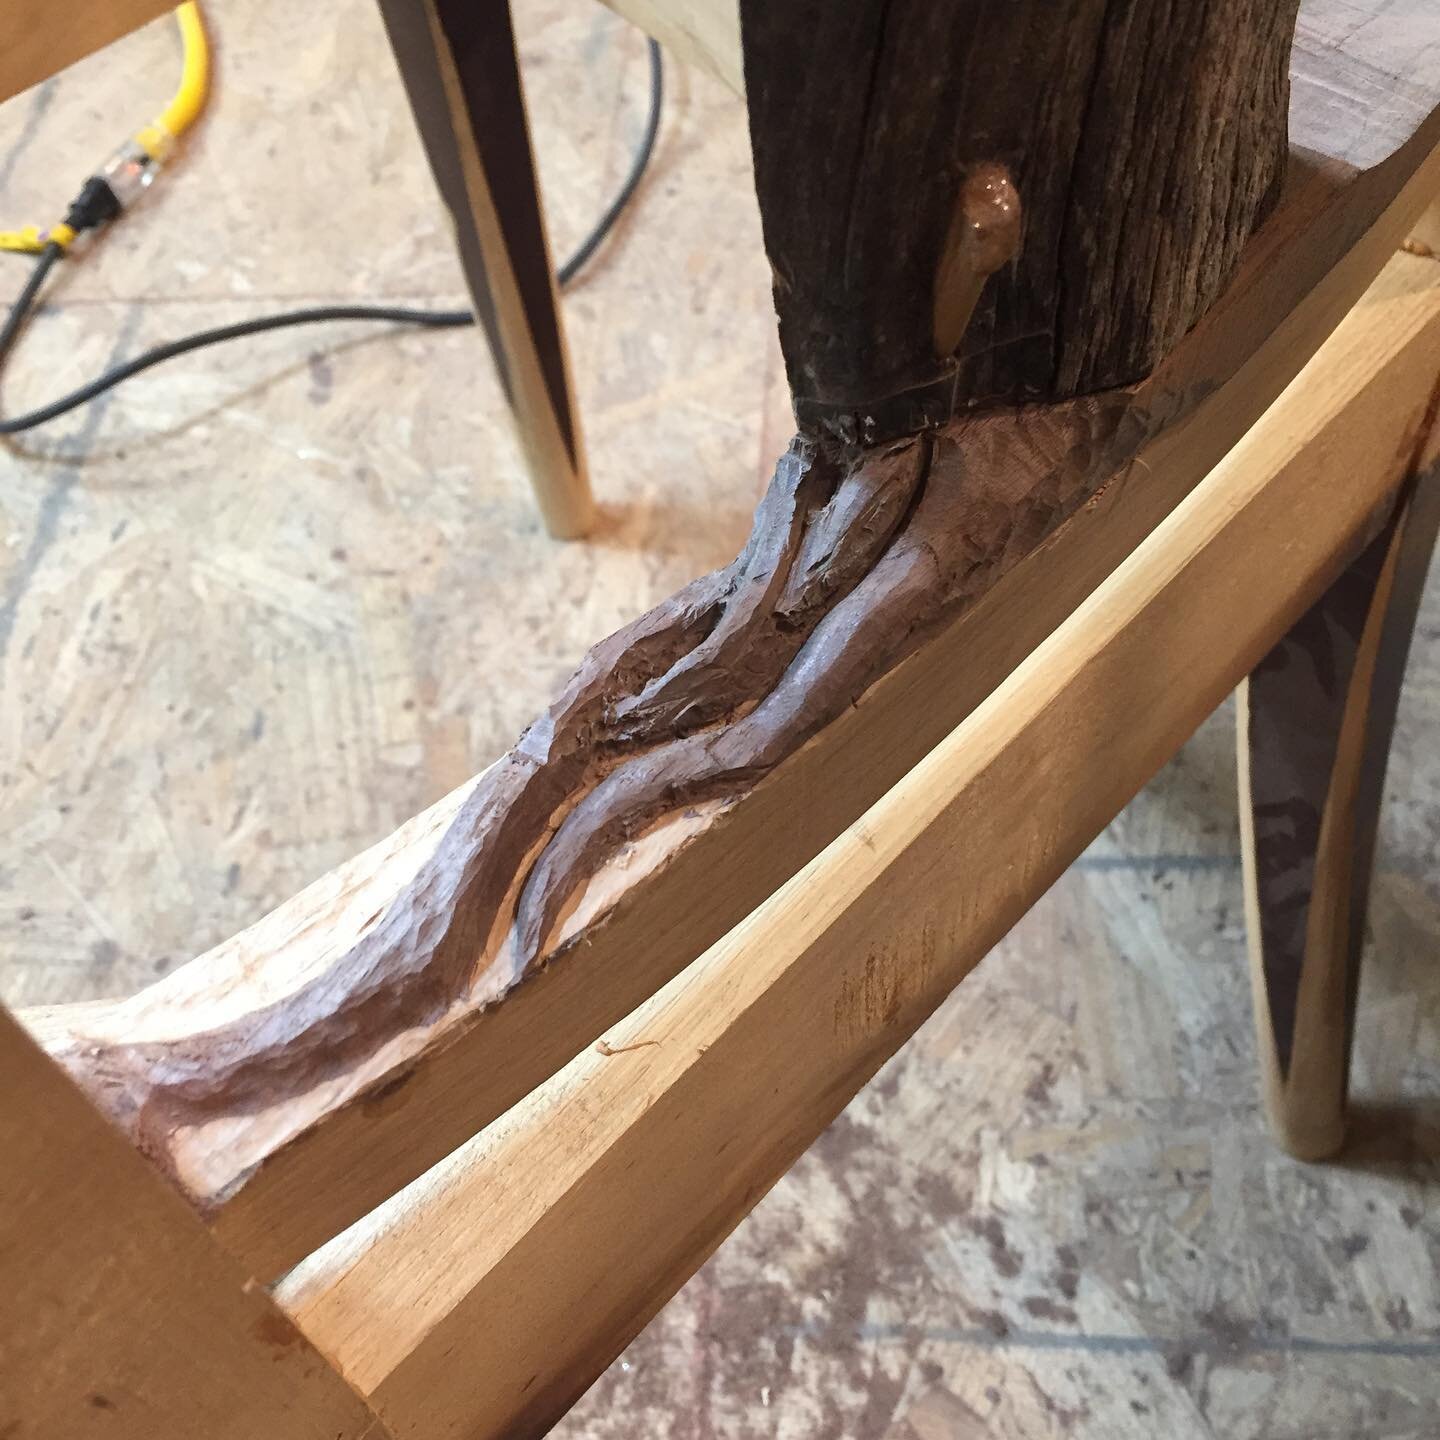 Carving: that awkward middle stage.  8Branches #rescuechair #handmadechair #madeinsf #8branchesproject #sfwoodworking
#ecofurniture #ecohome #ecodesign #ecodecor #sustainable